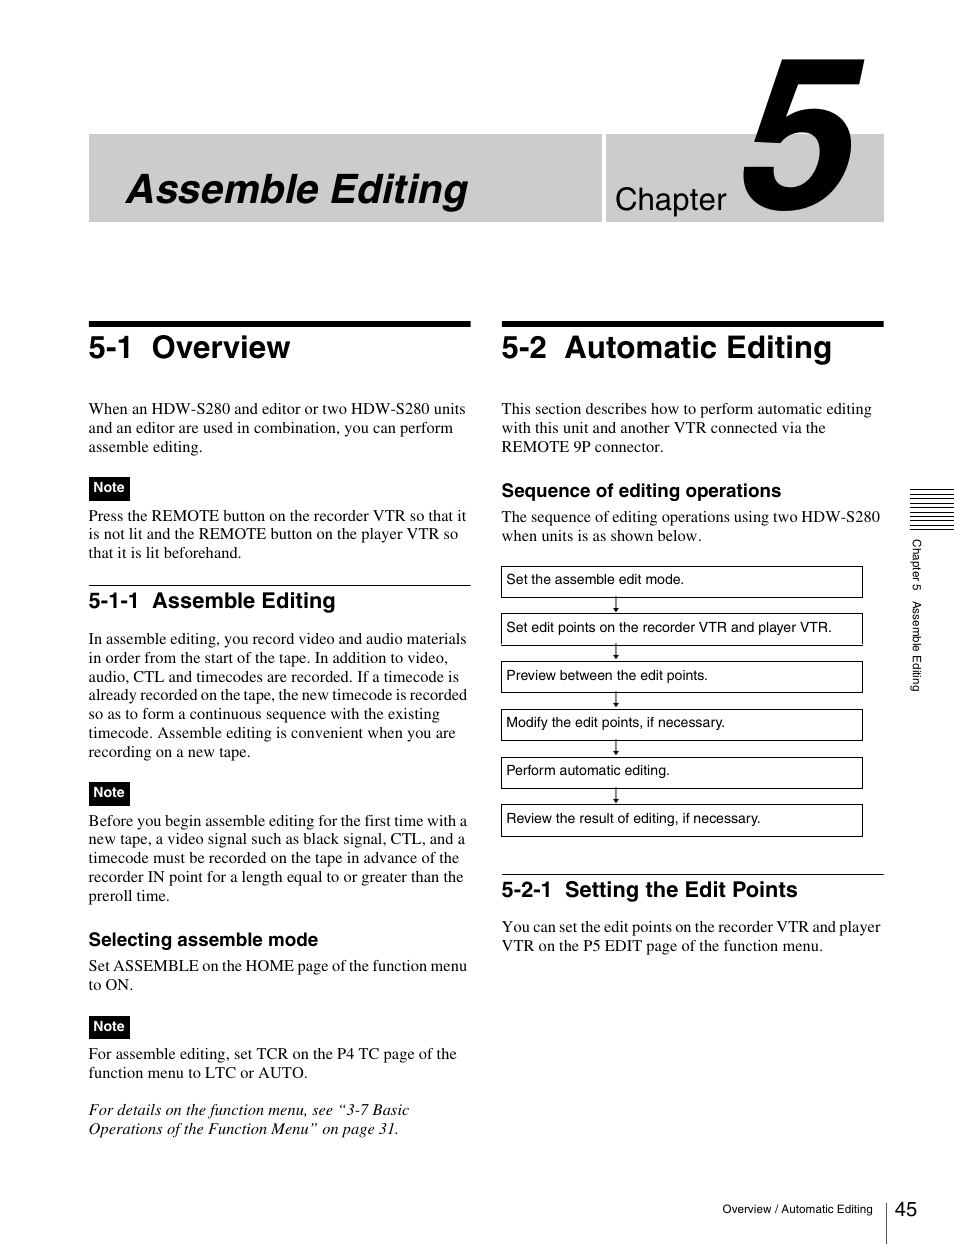 Chapter 5 assemble editing, 1 overview, 1-1 assemble editing | 2 automatic editing, 2-1 setting the edit points, Overview, Assemble editing, Automatic editing, Setting the edit points, Chapter | Sony HDW-S280 User Manual | Page 45 / 94